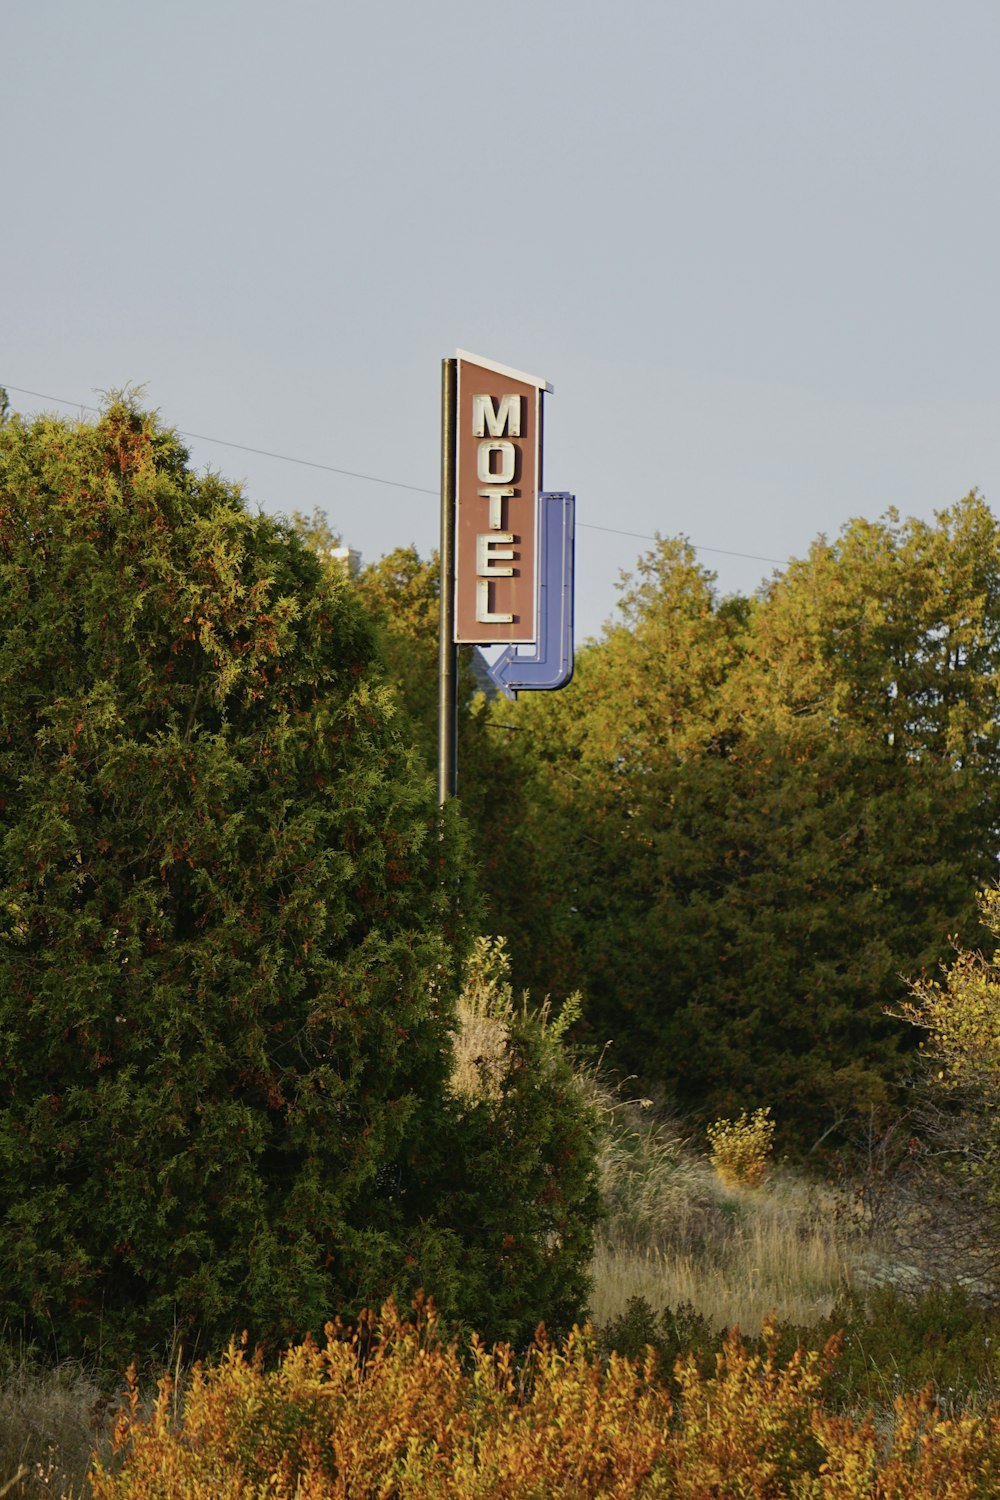 a motel sign in front of some trees